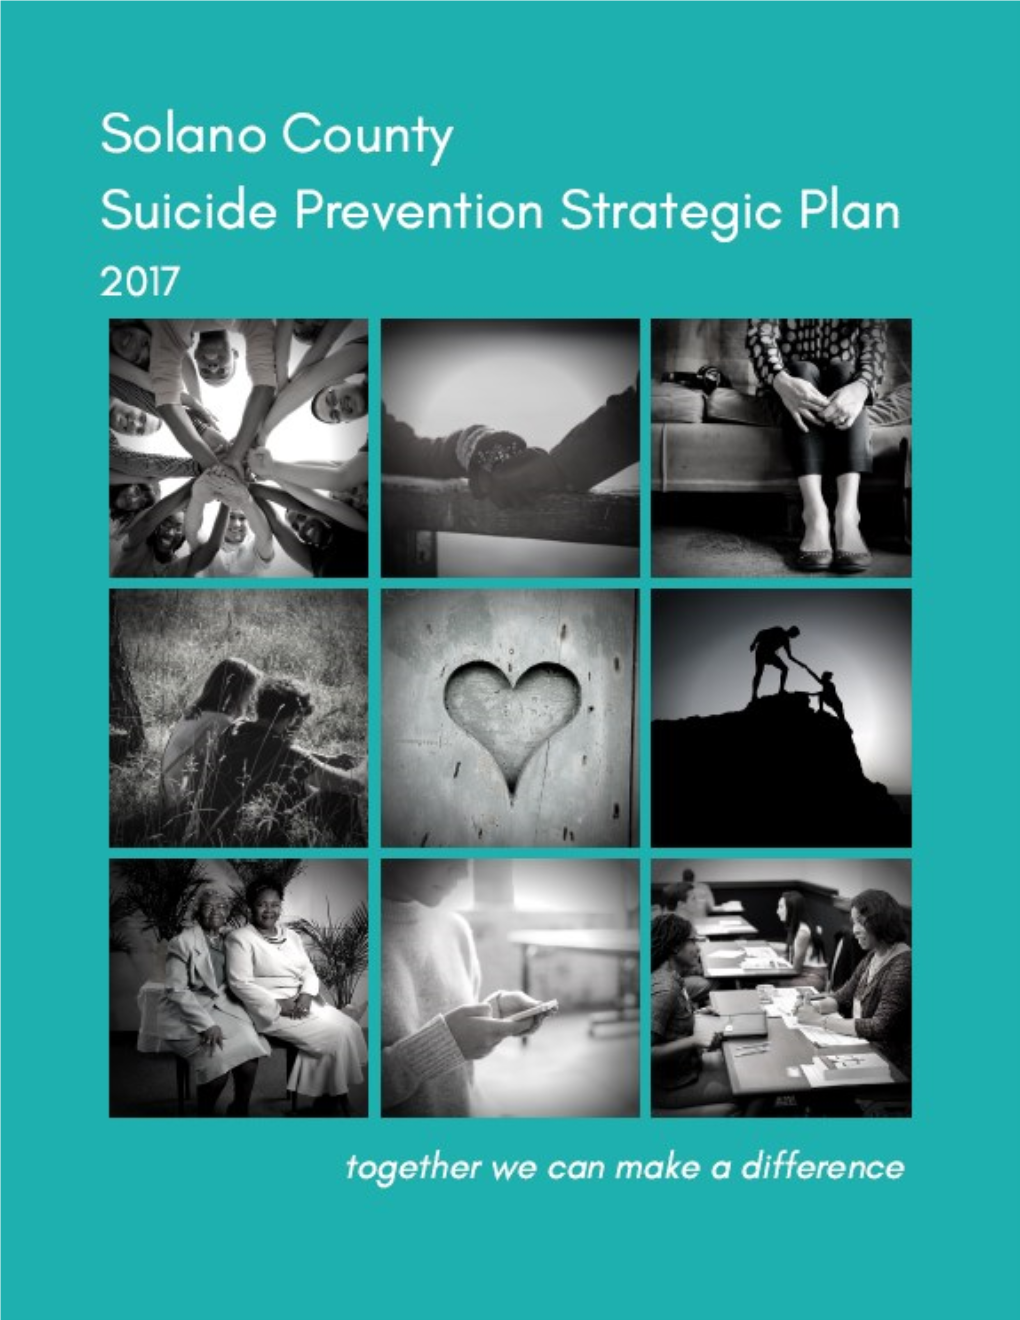 Solano County Suicide Prevention Strategic Plan Is Intended To: 1